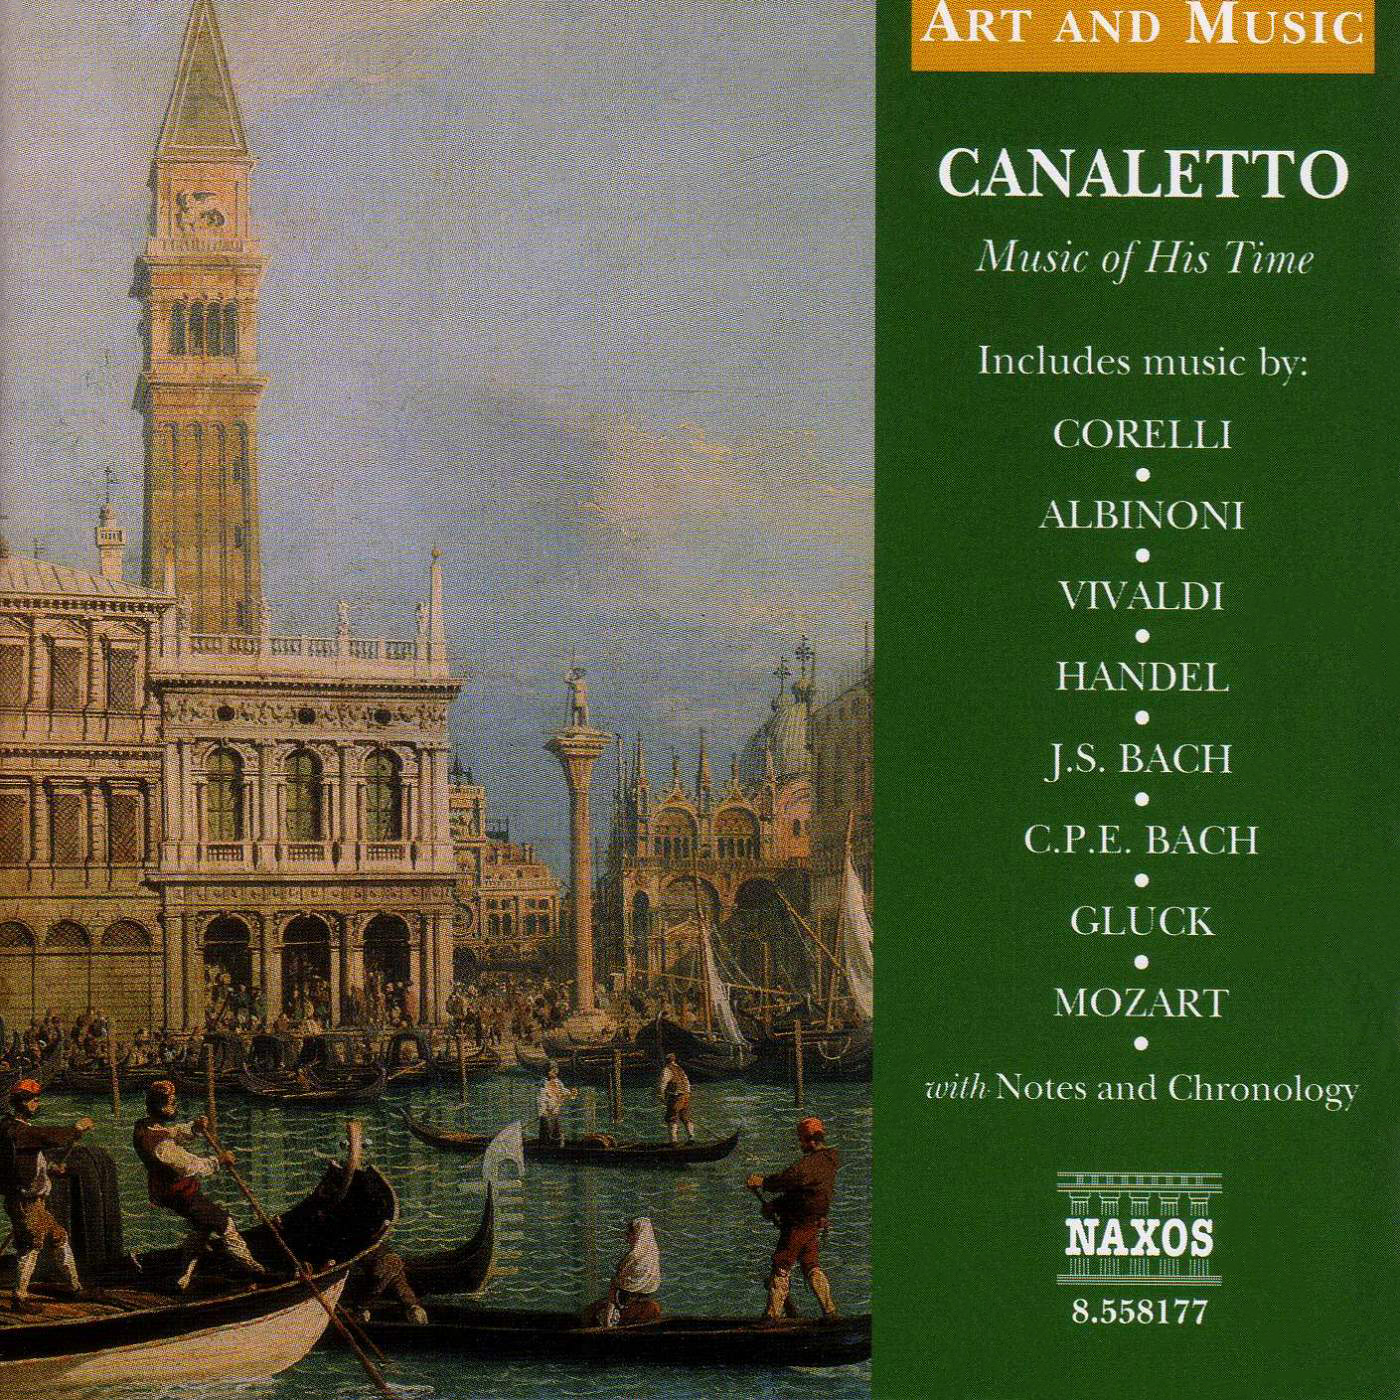 Art and Music: Canaletto - Music of His Time